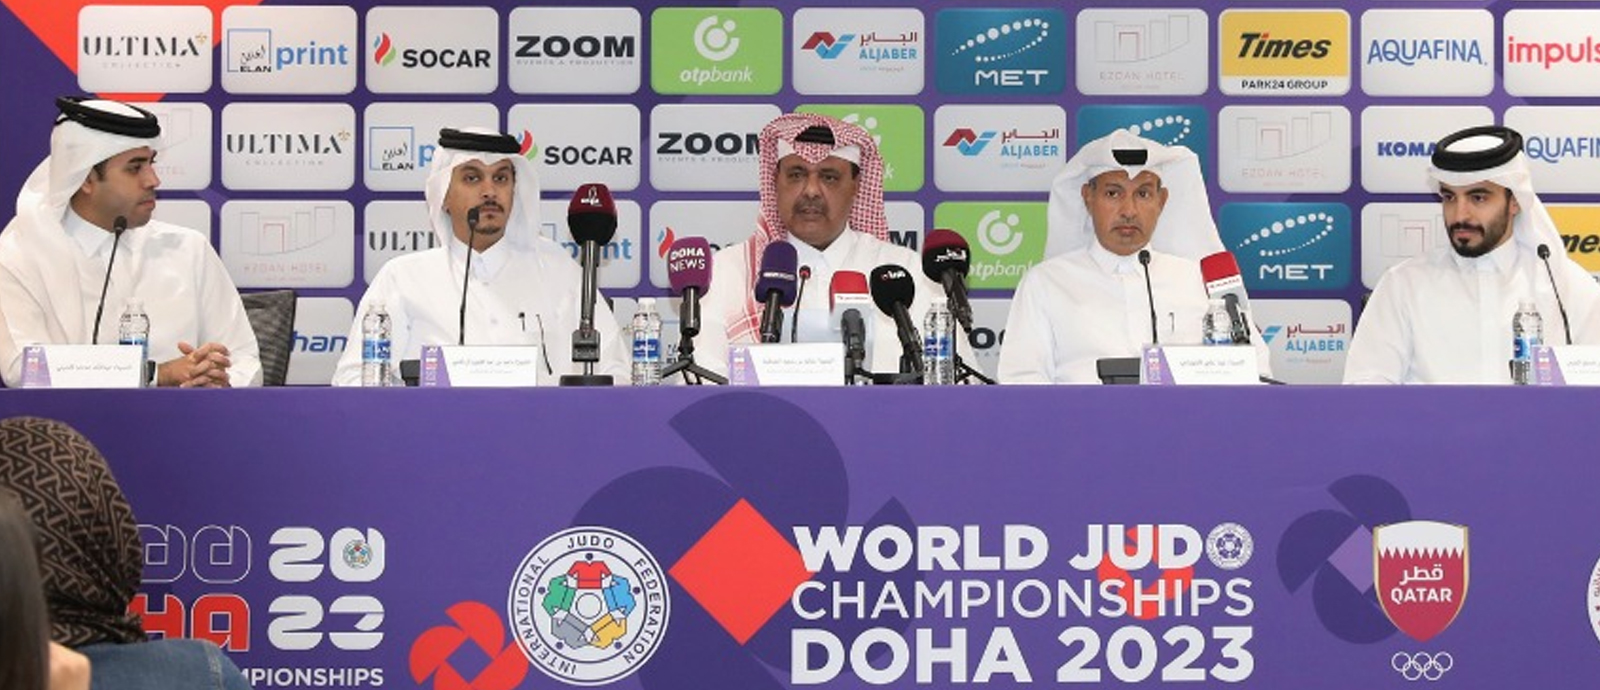 2023 World Judo Championships Organizing Committee Announces Tournament Details